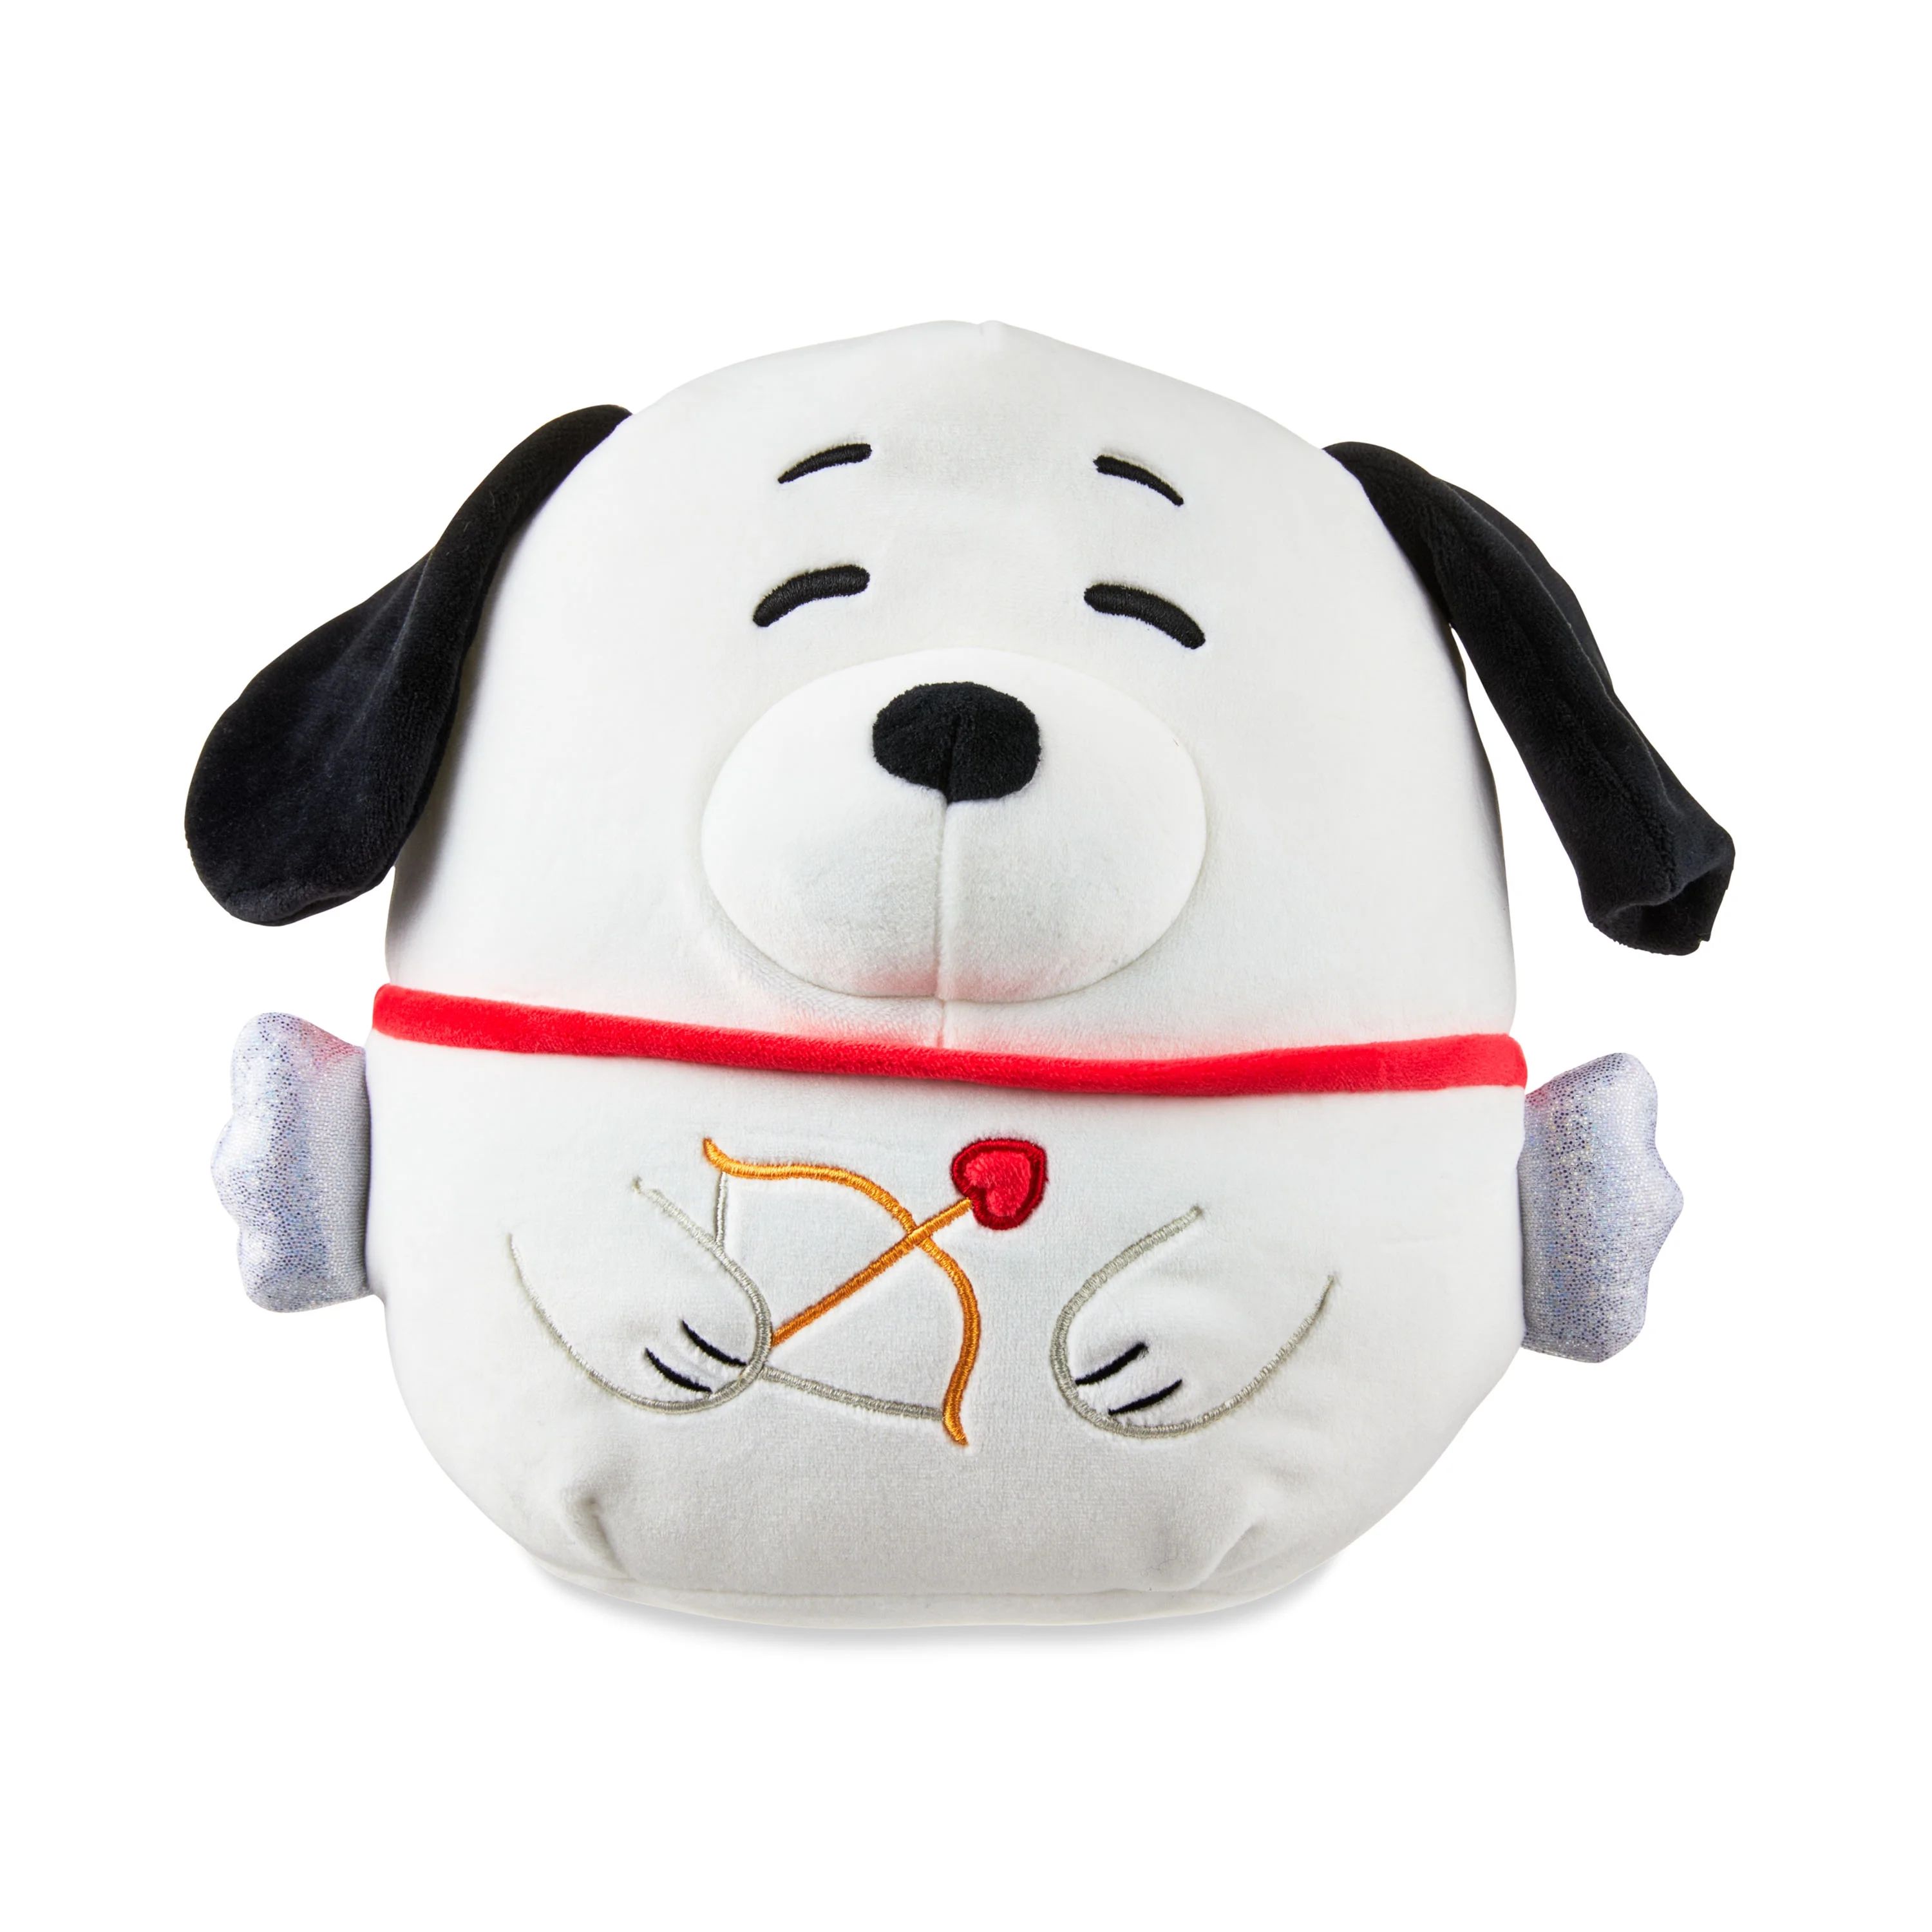 Squishmallows Official Plush 8 inch White and Black Snoopy - Child's Ultra Soft Stuffed Plush Toy | Walmart (US)